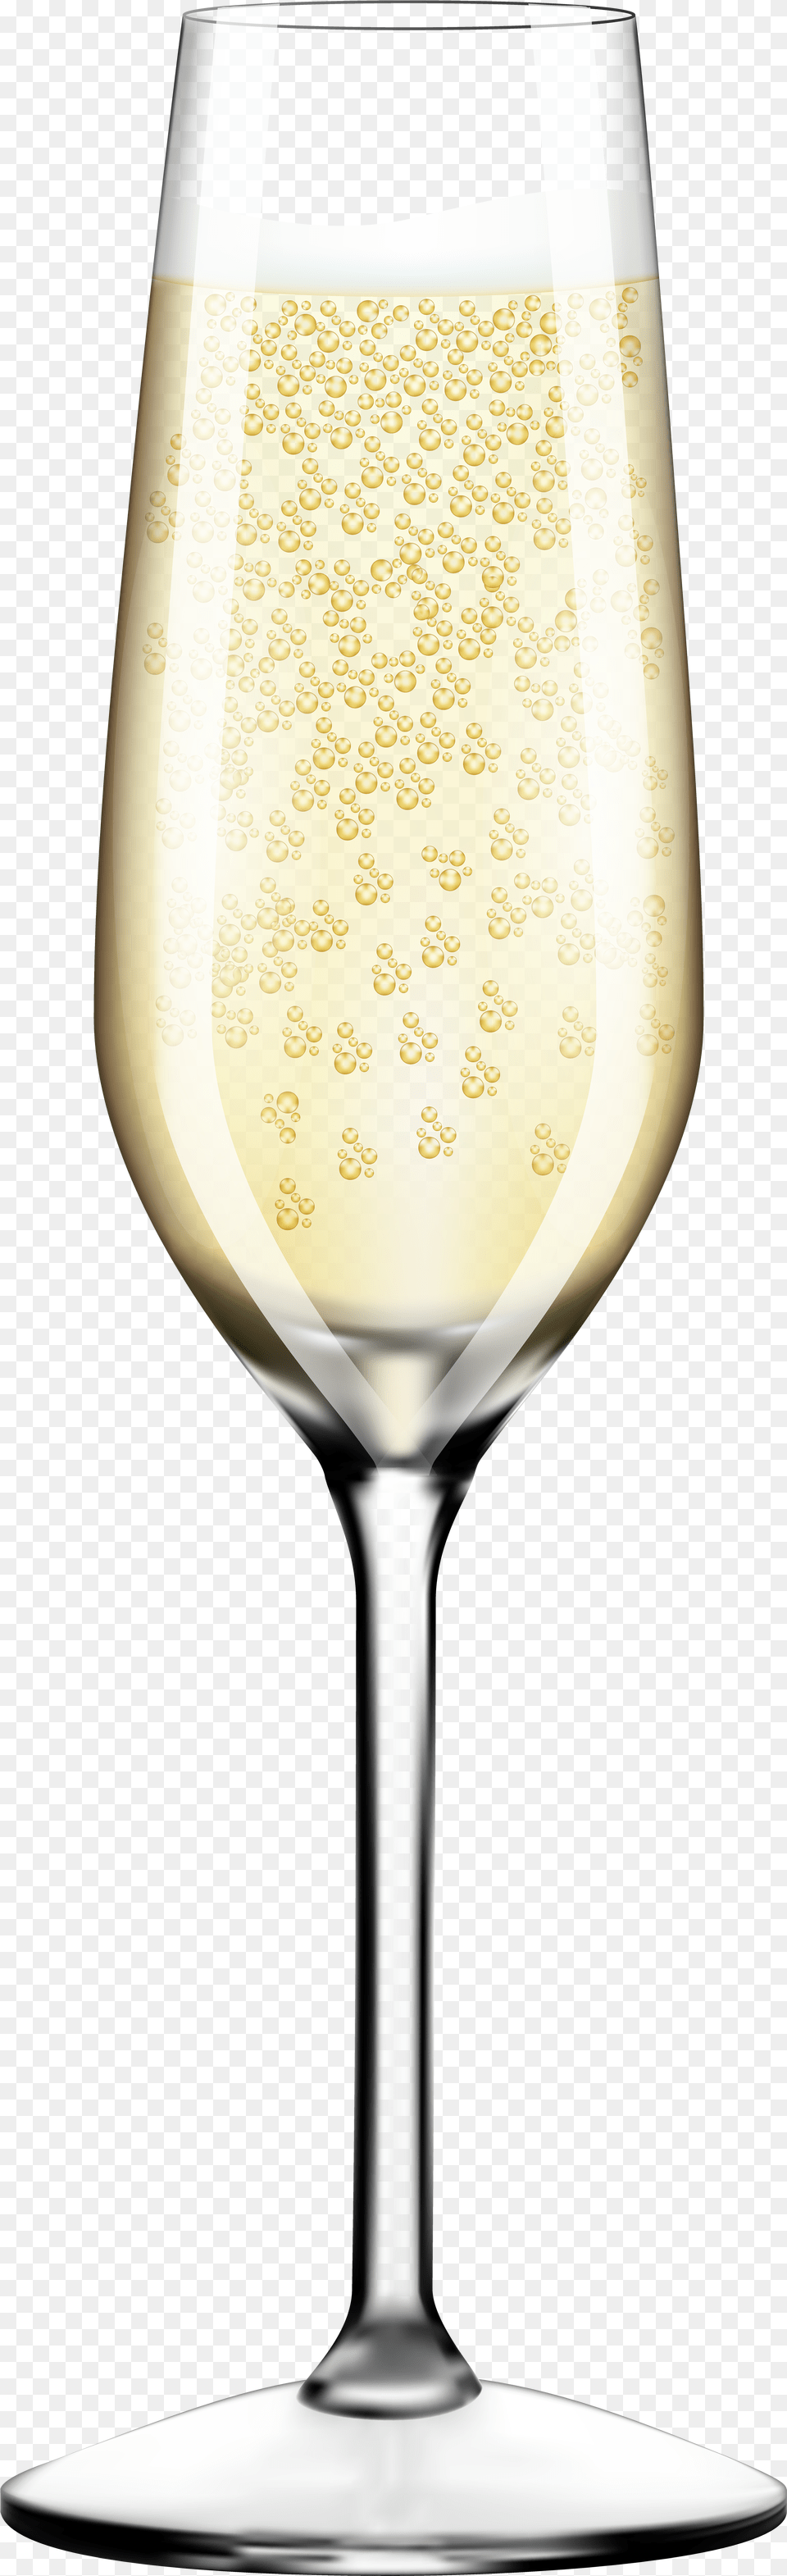 Transparent Wine Glass Full Champagne Glass Png